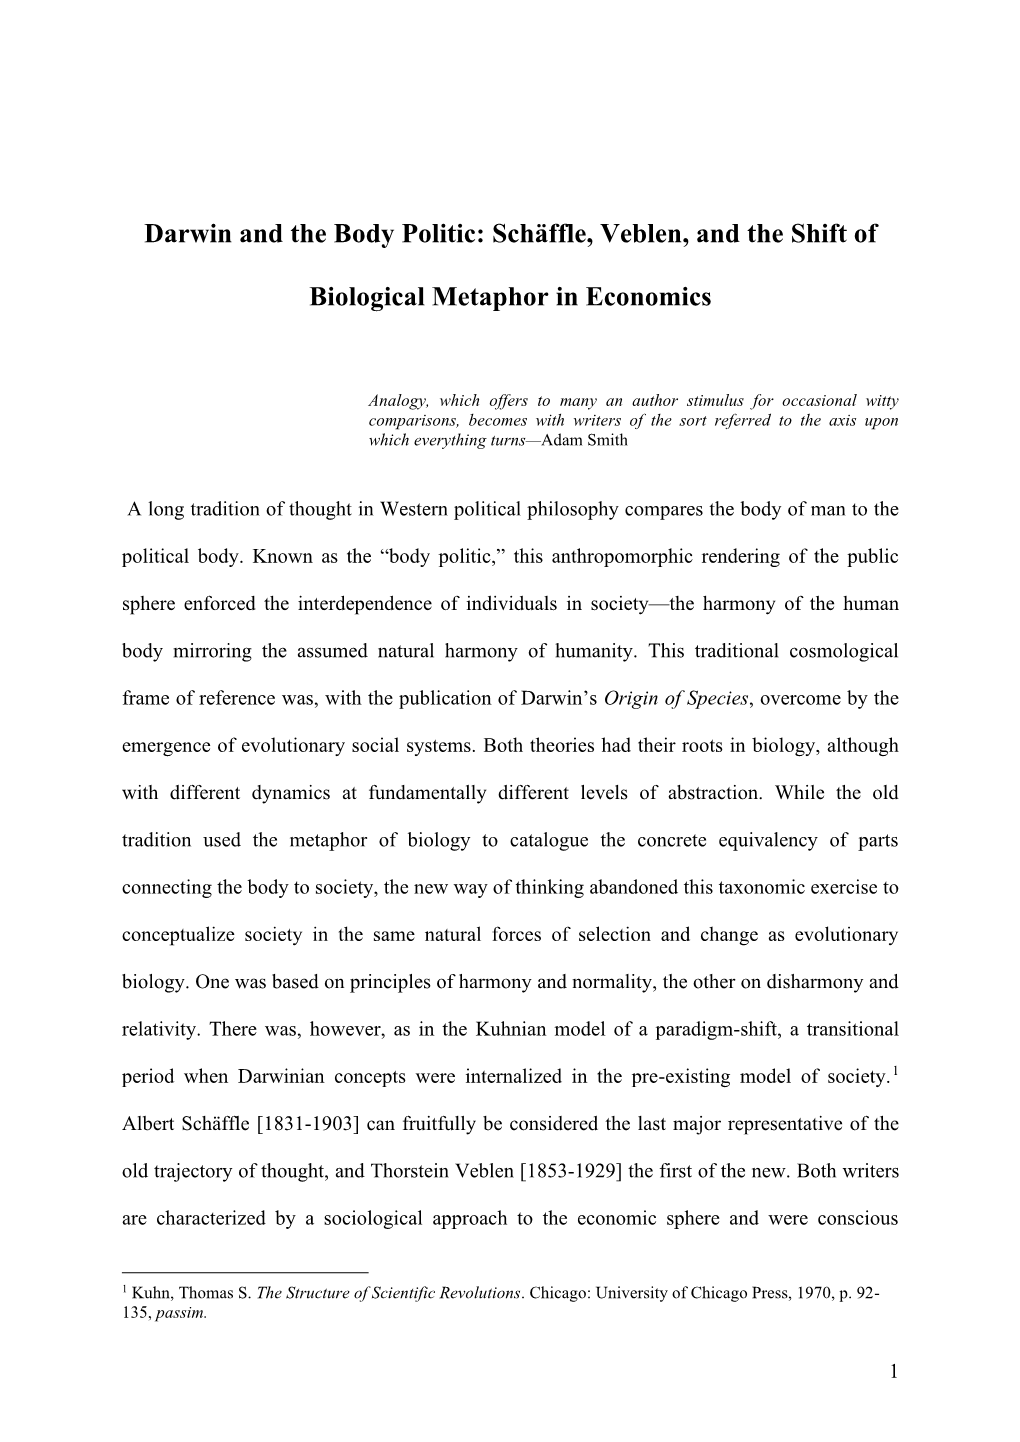 Darwin and the Body Politic: Schäffle, Veblen, and the Shift Of